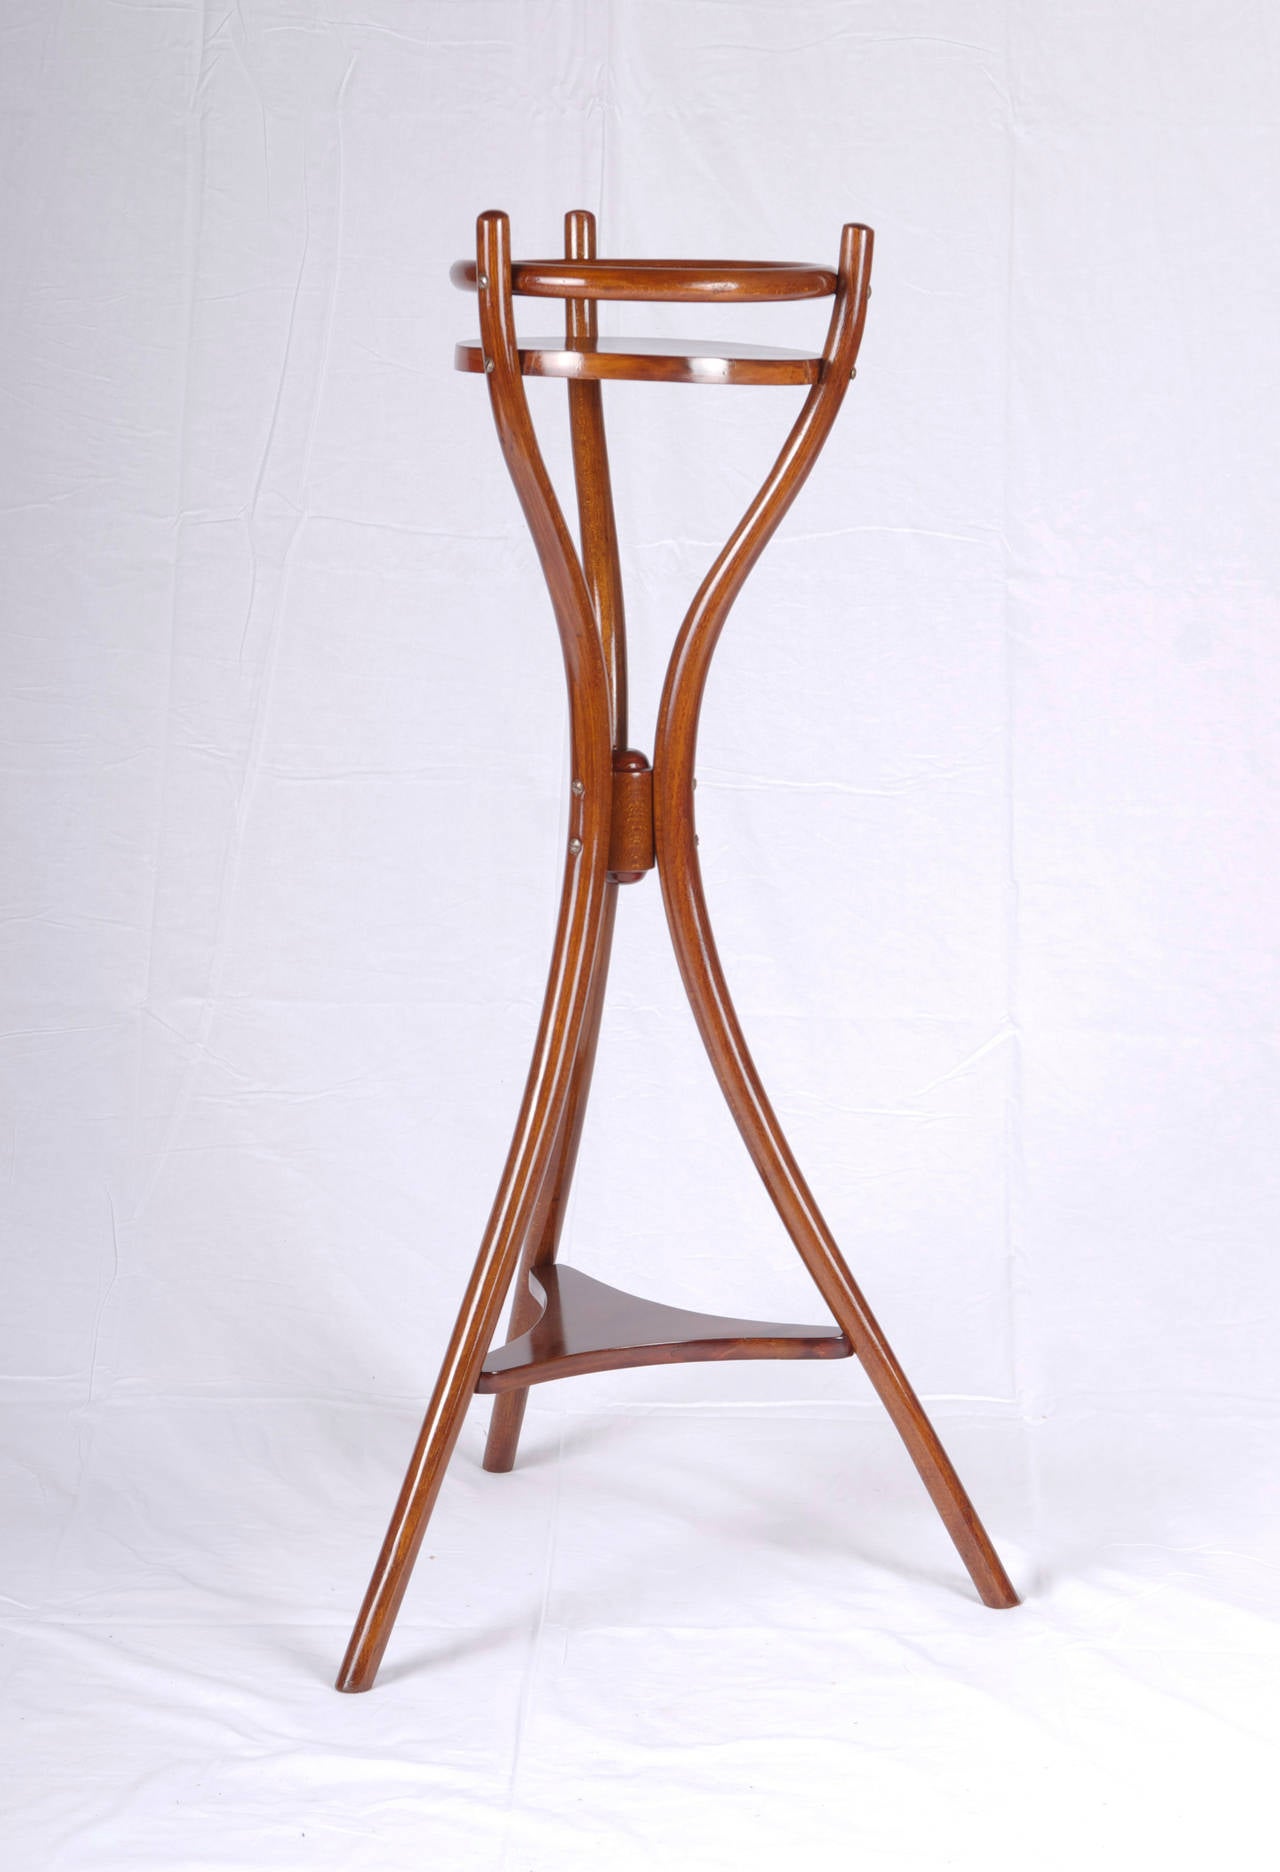 Pedestal, Flower Stand Thonet 
restored with shellac finish